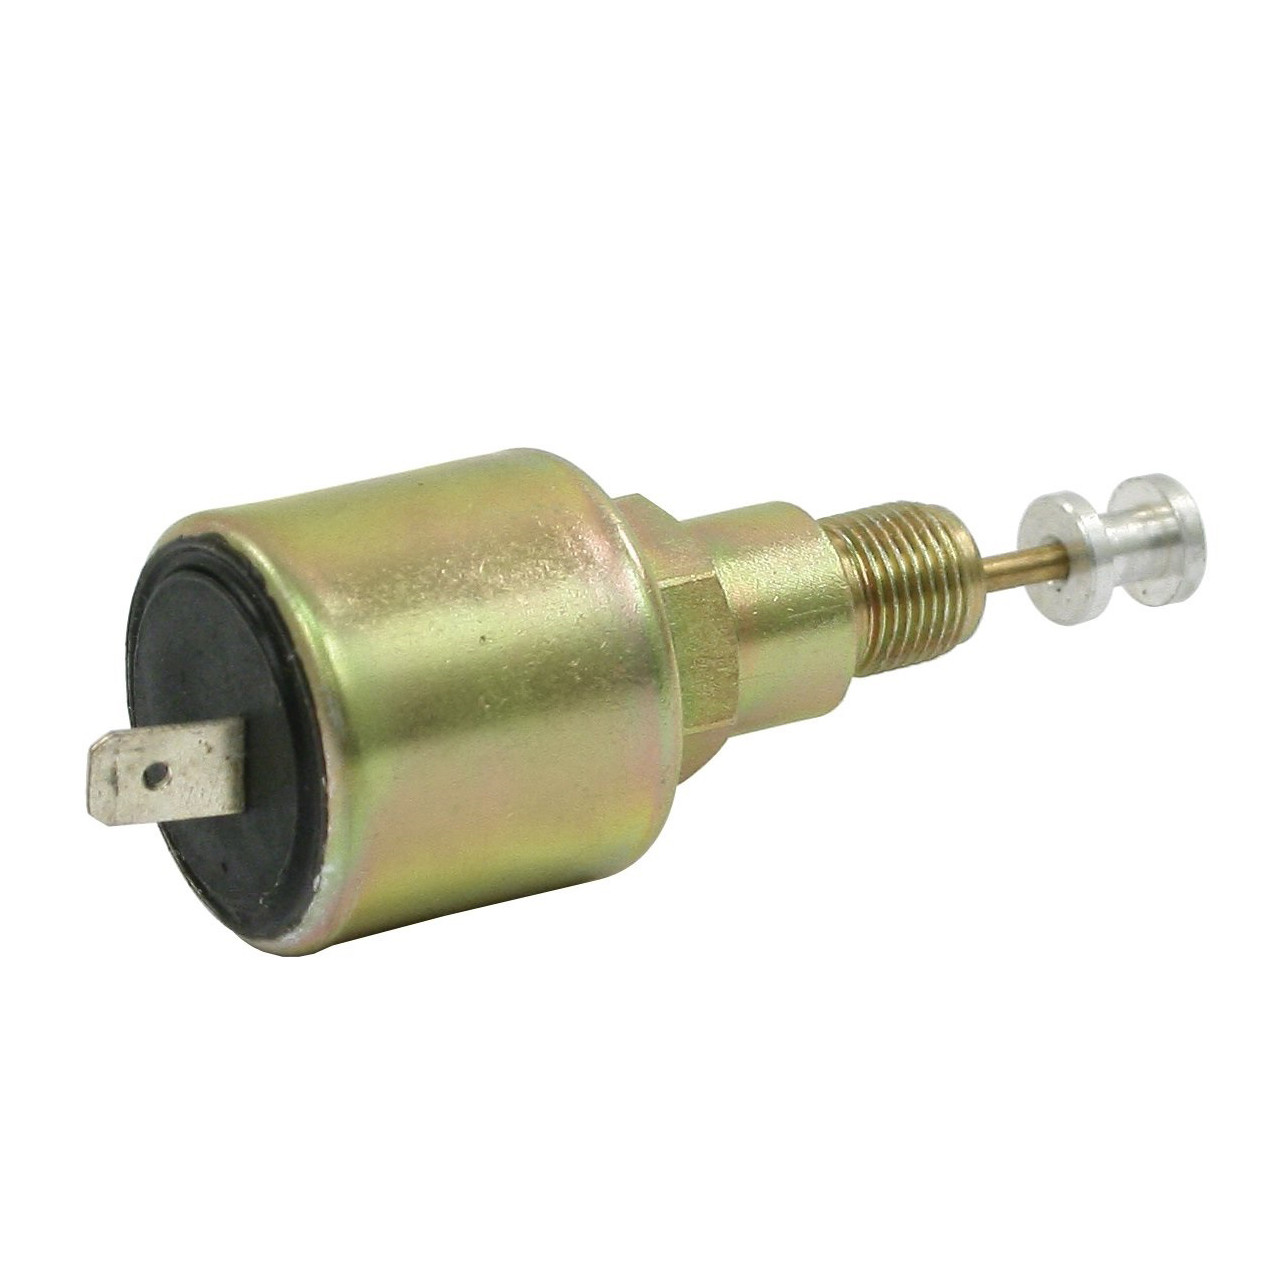 Image of VWC-056-129-412 - IDLE AIR BYPASS / CUT-OFF VALVE FOR 34 PICT-3 CARB 12V - BEETLE 71-74 - GHIA 71-74 - BUS 71-74 - VW THING 71-79 - REF.#'s 049-129-412-C - 049129412C - 98-1297-B - SOLD EACH